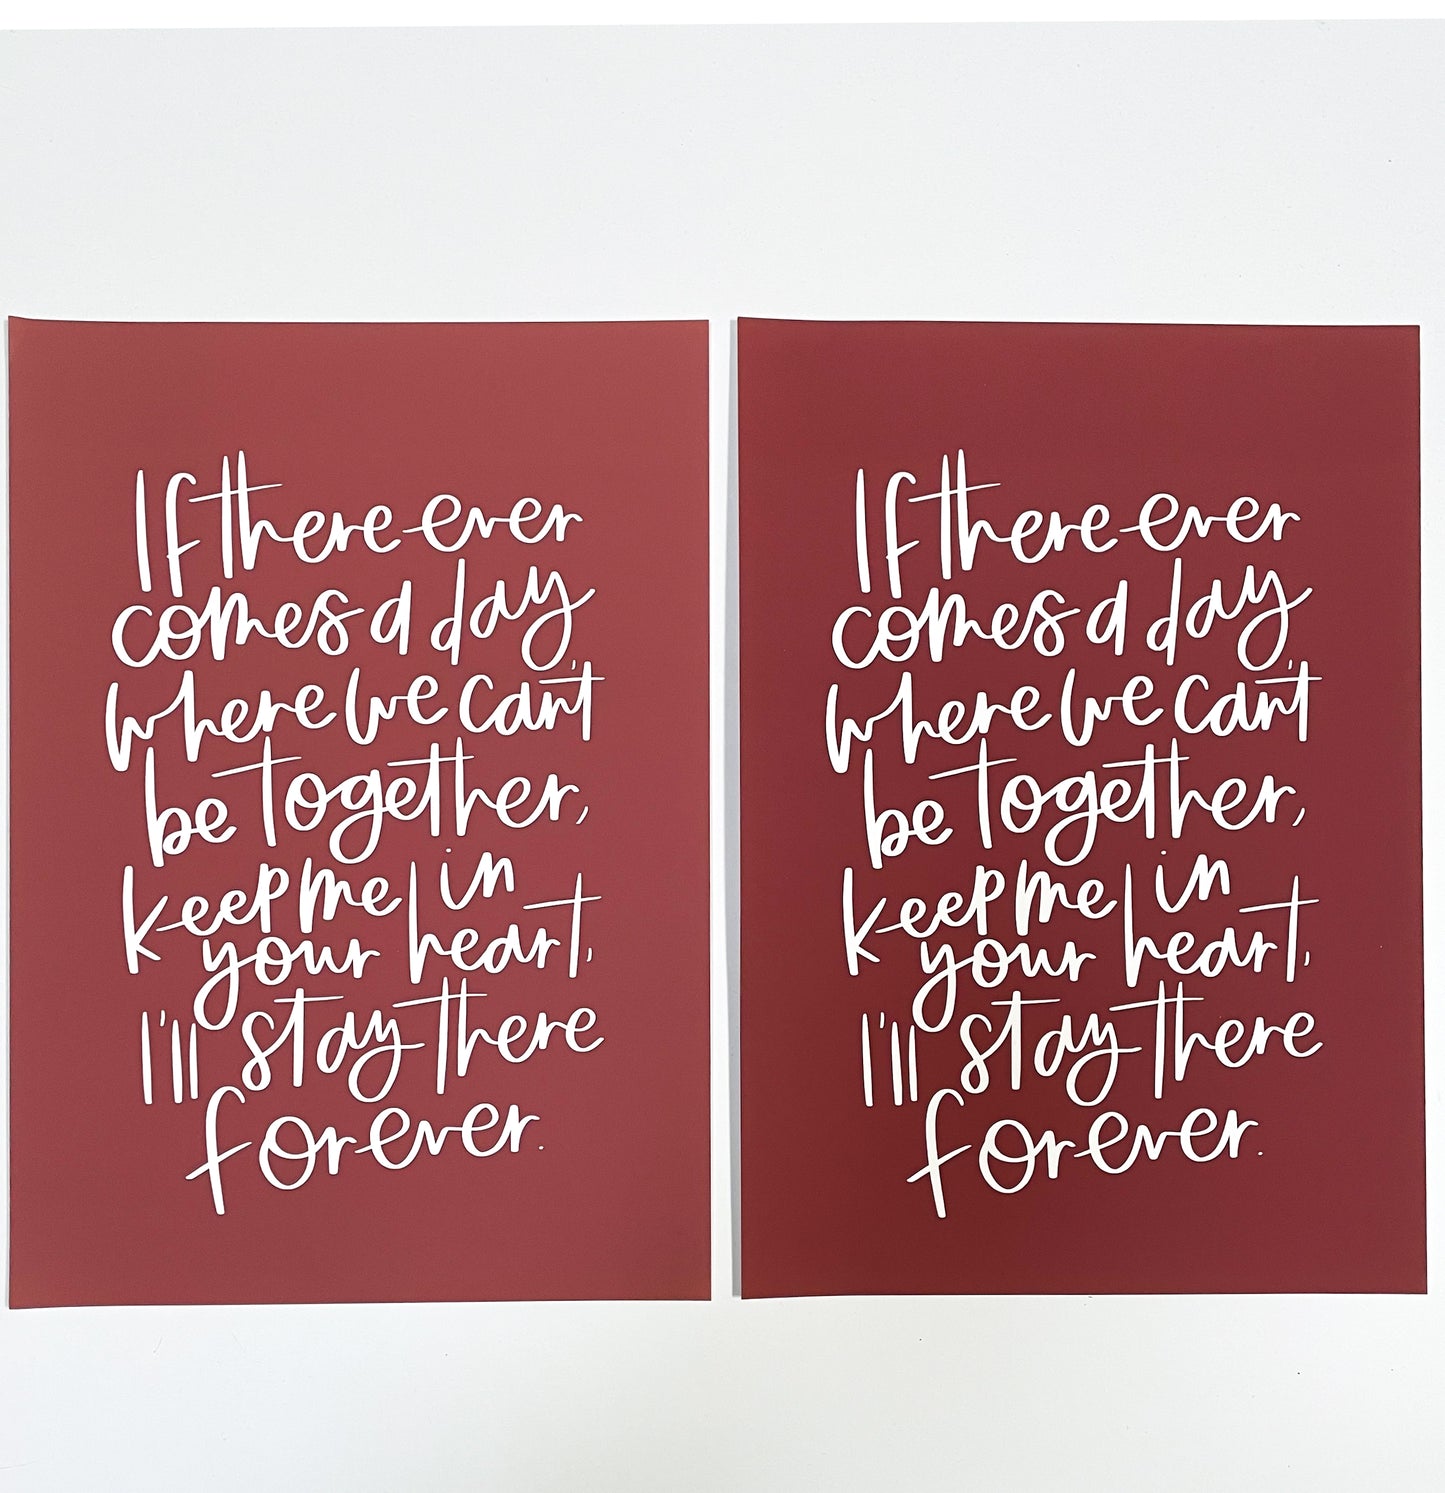 Keep me in your heart quote print Sample Sale - A4 Brick red